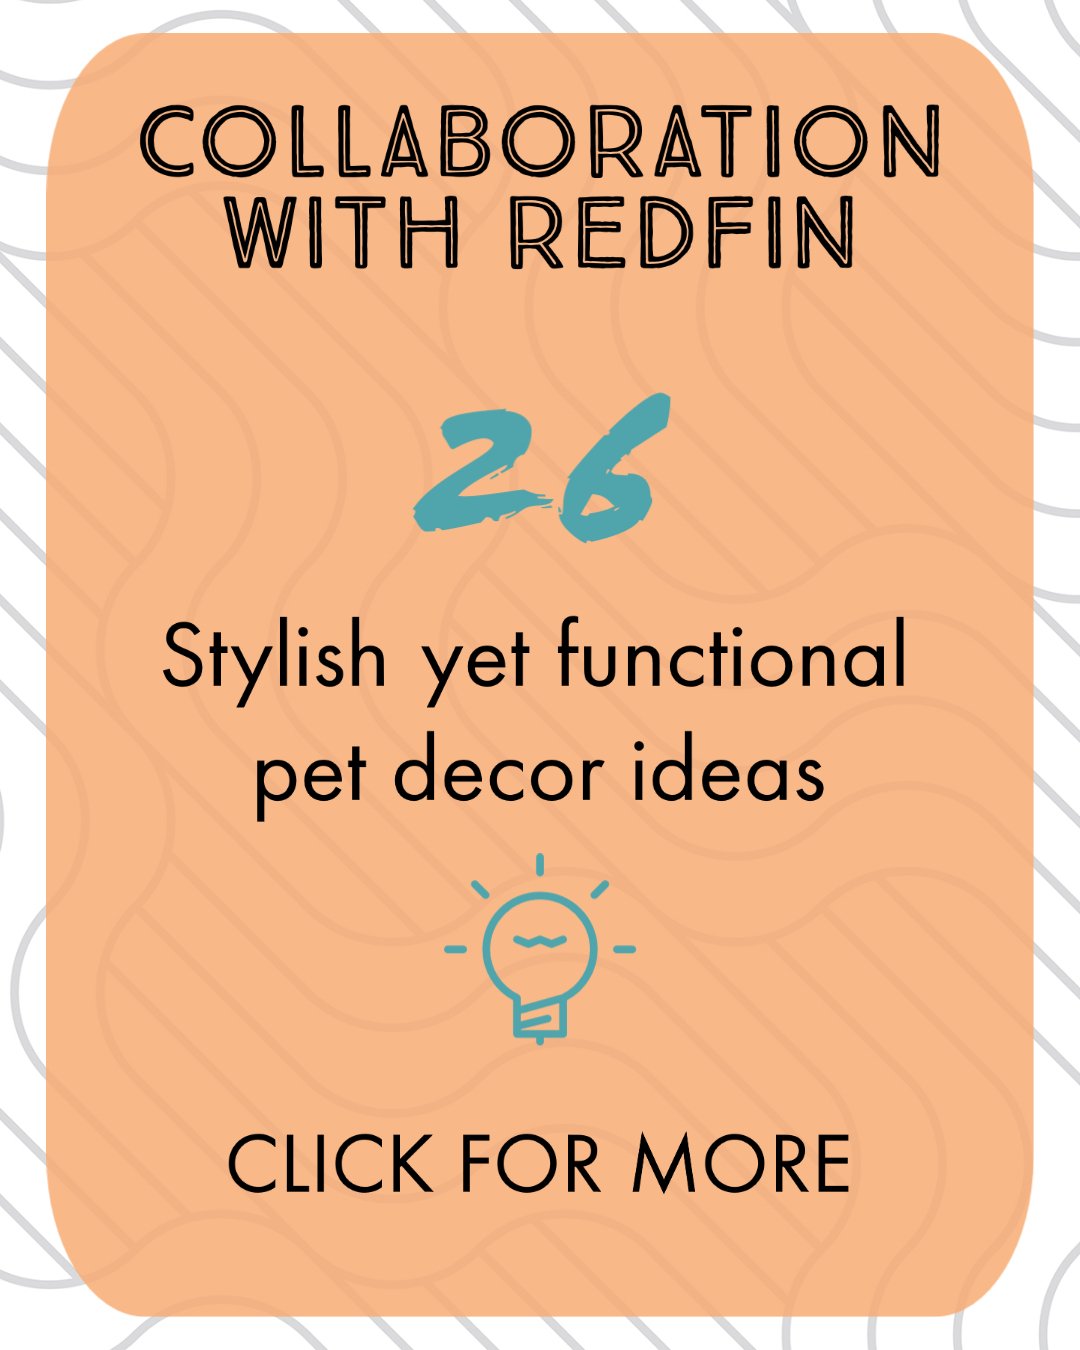 Collaboration with Redfin_26 stylish yet functional pet decor blog post.jpg